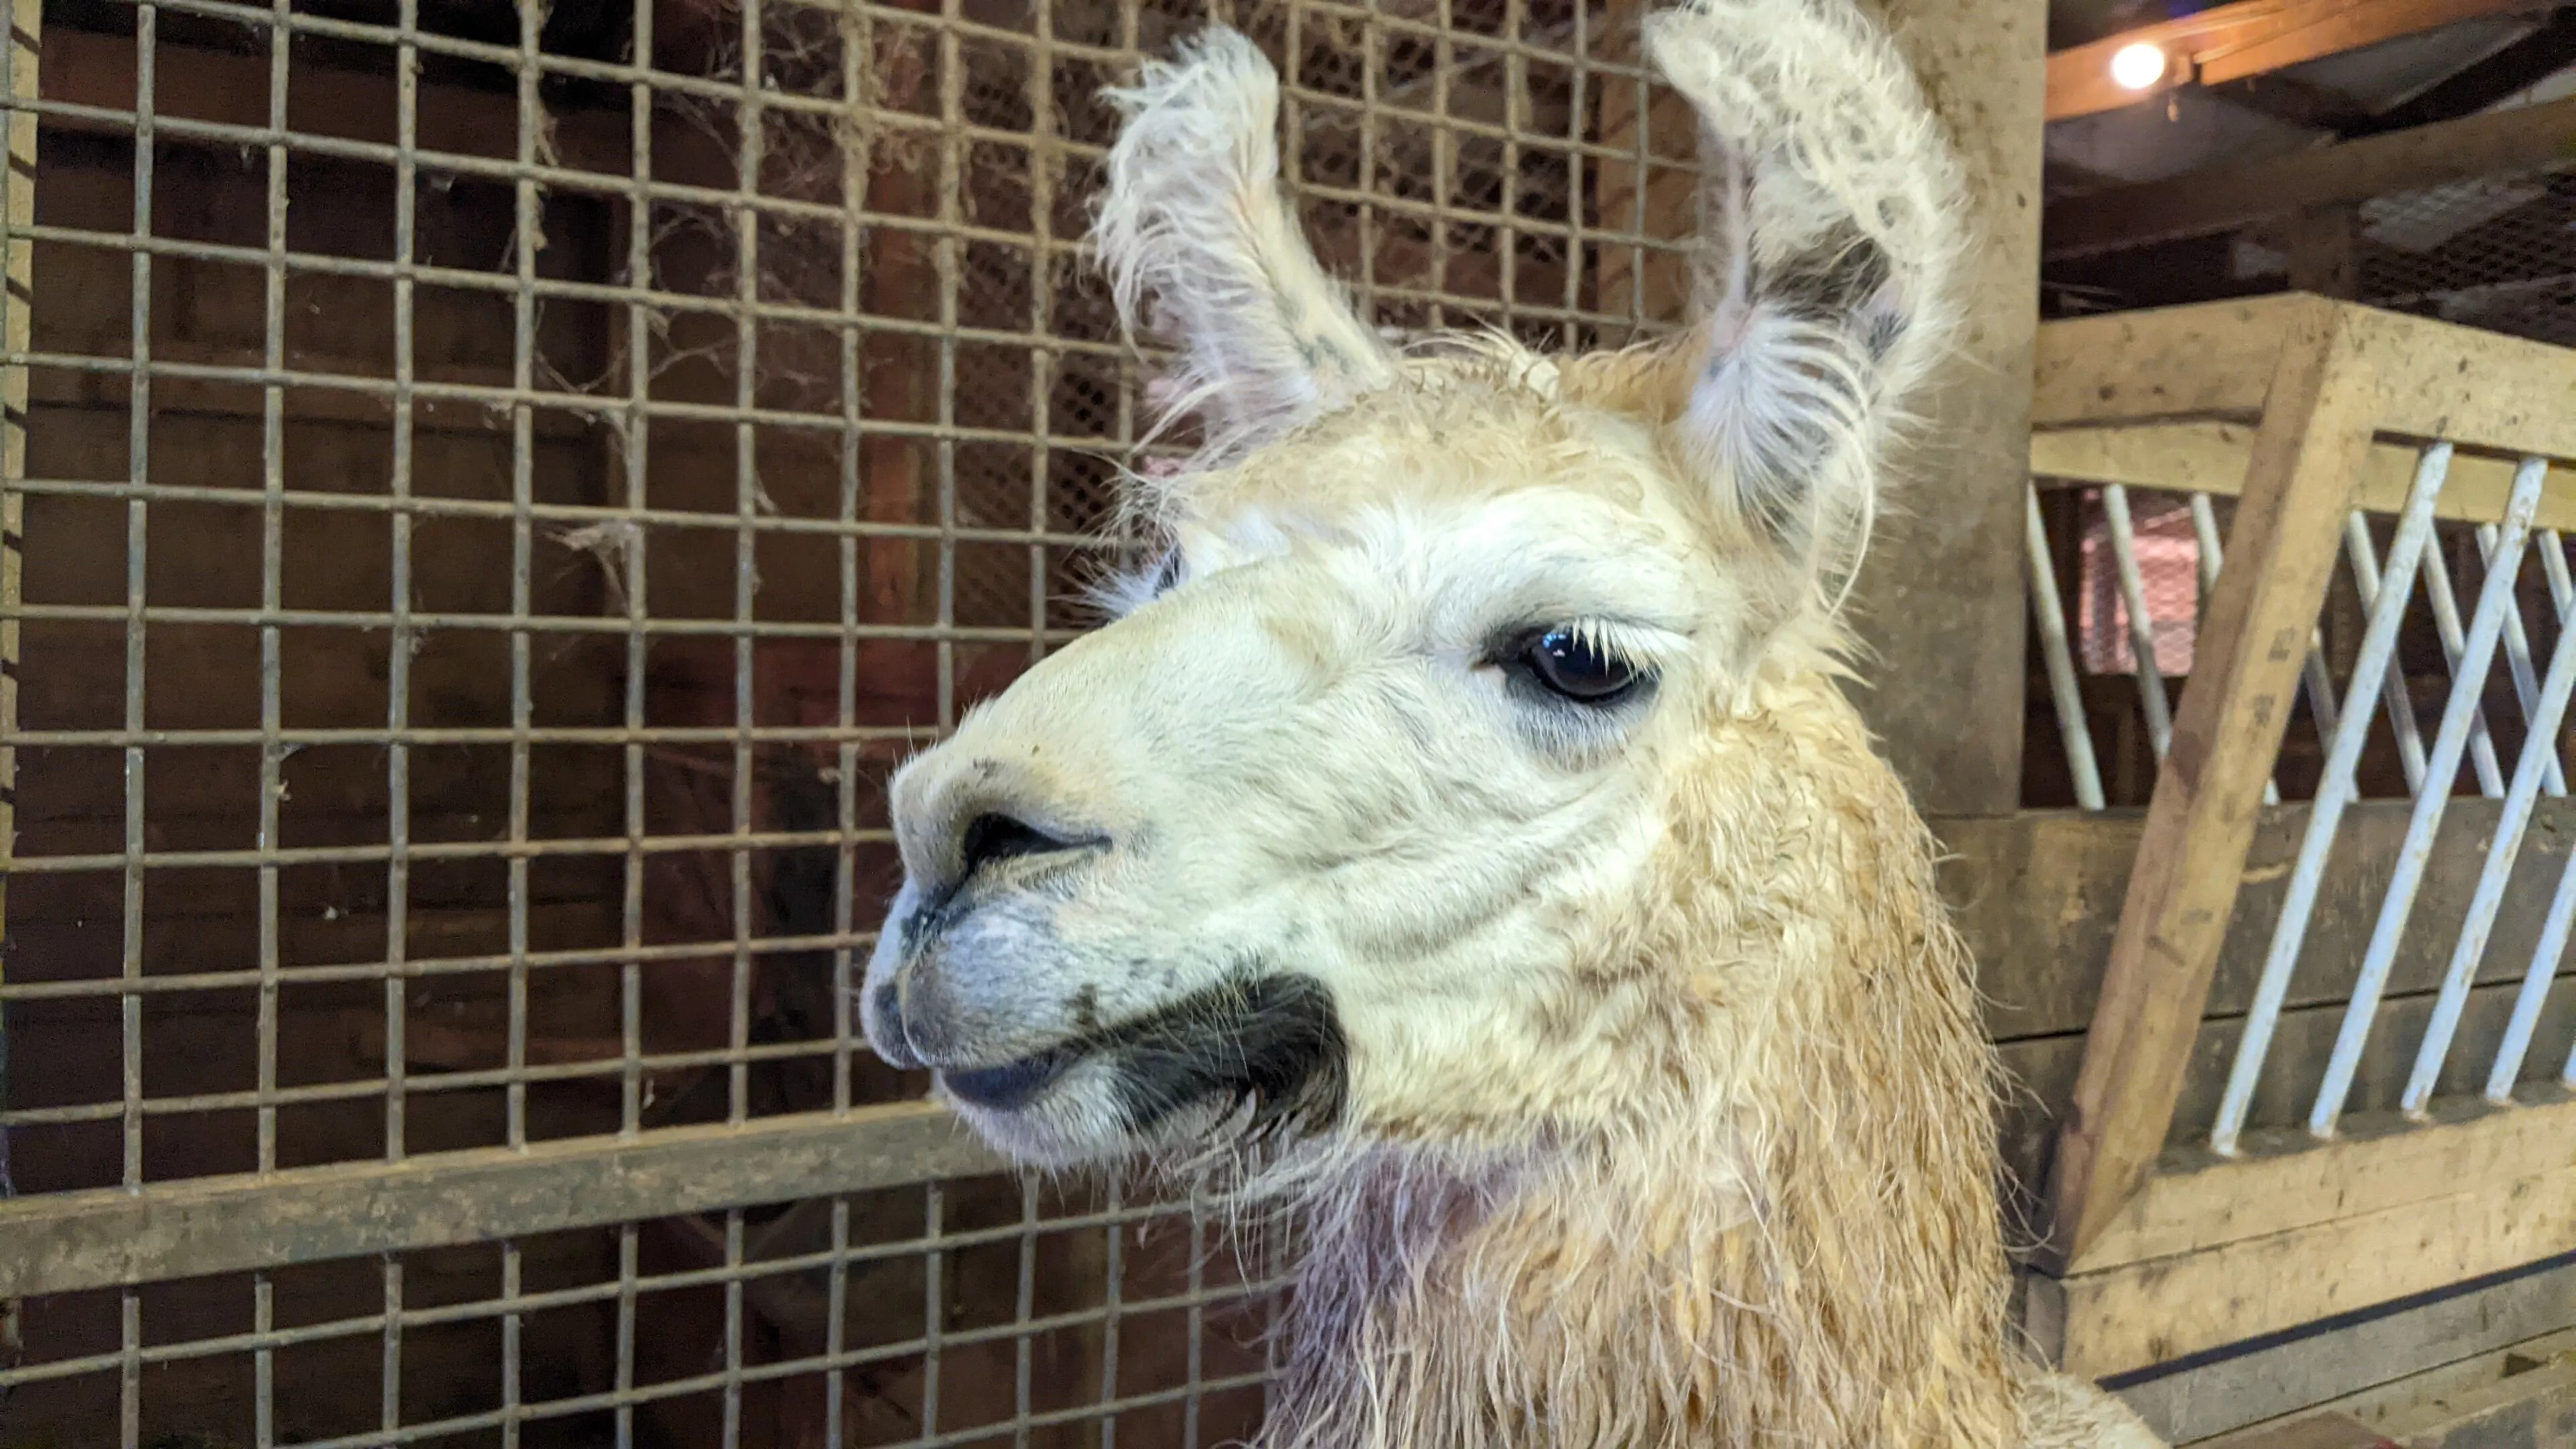 A photo of a llama named Hushabye in a barn next to a gate